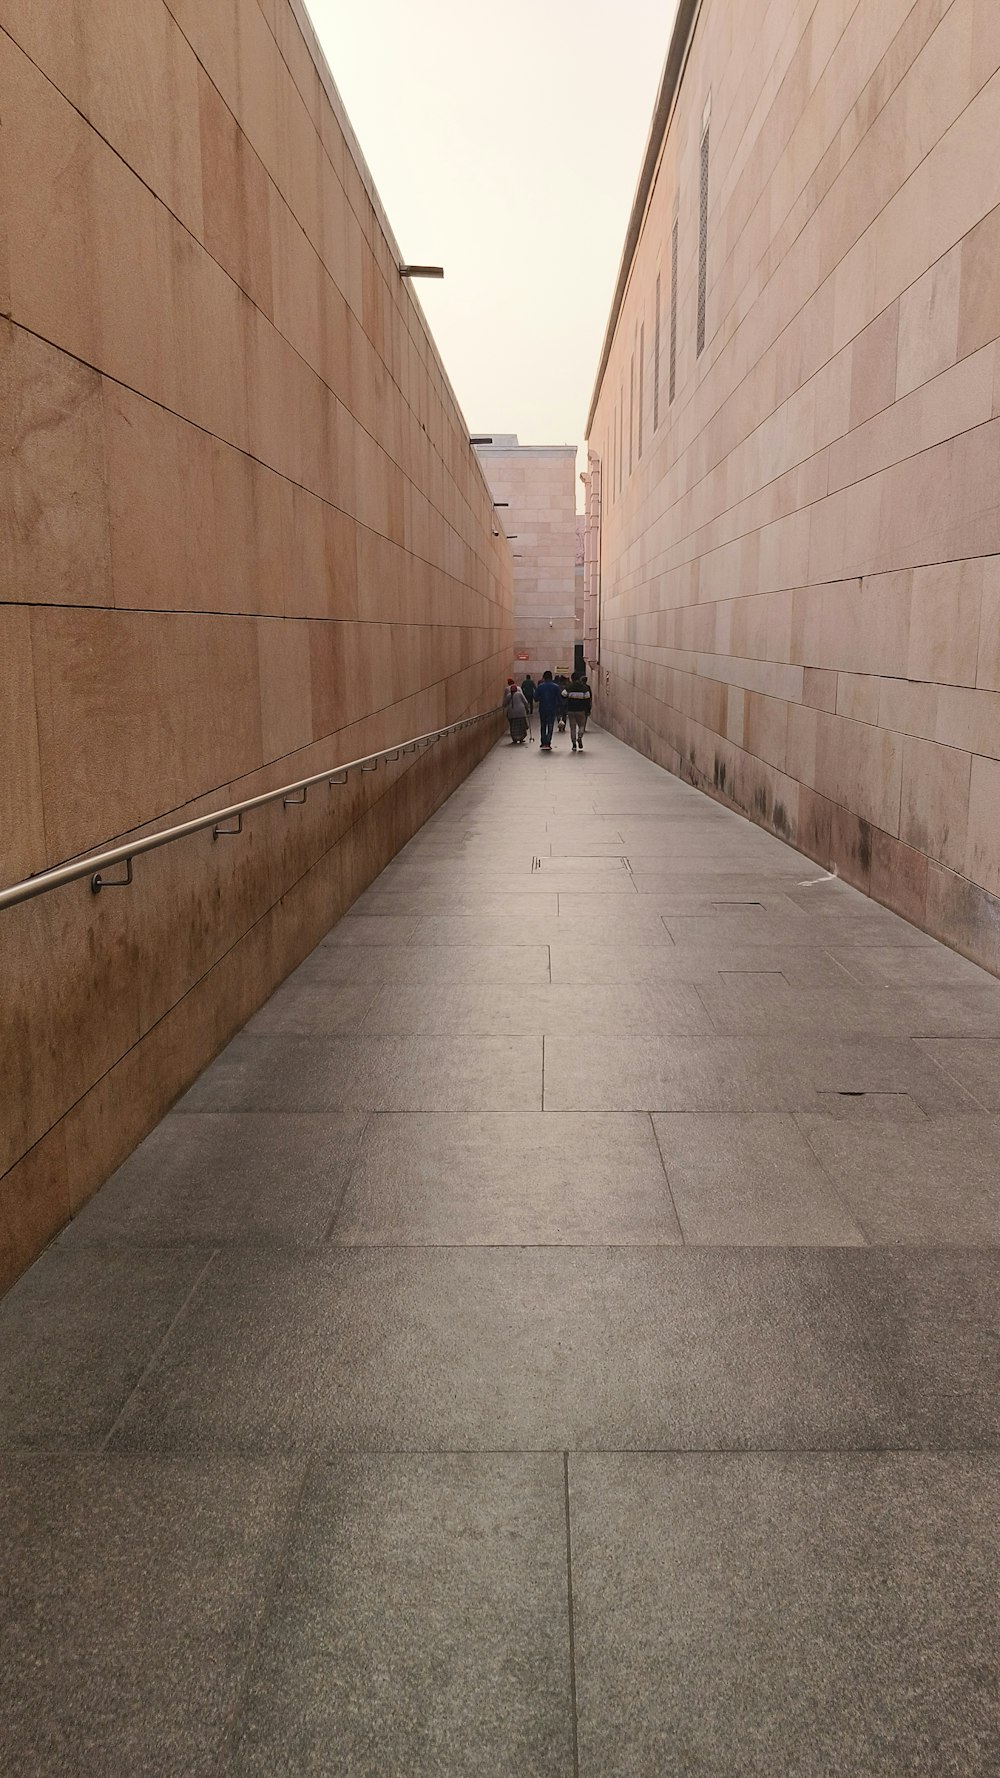 a couple of people walking down a sidewalk next to a wall